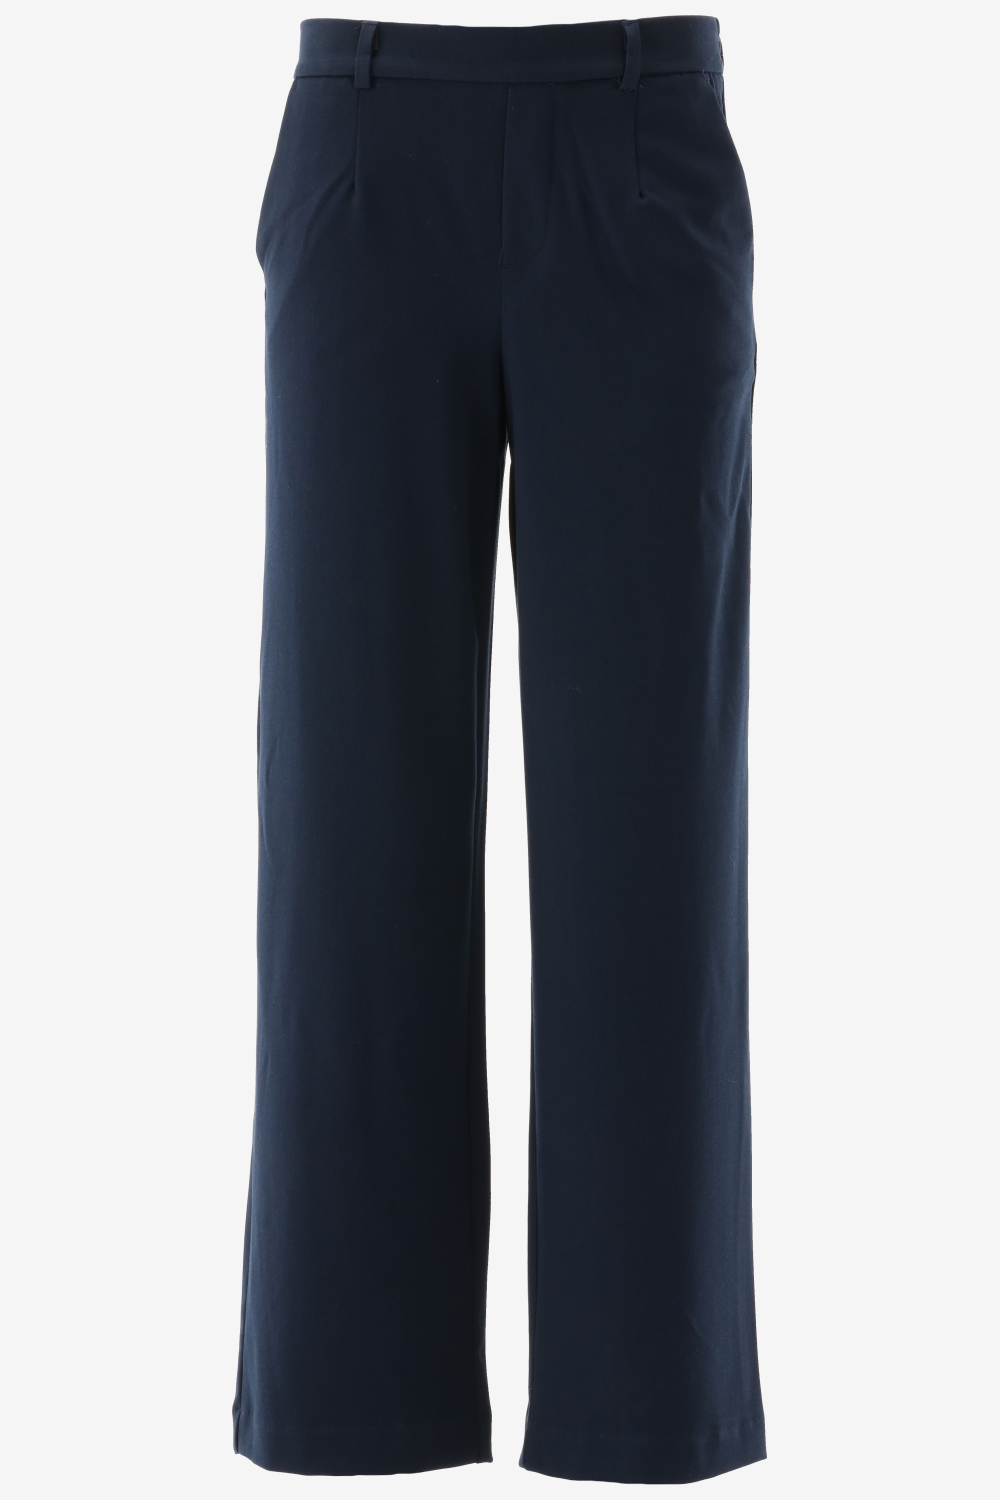 OBJECT COLLECTORS ITEM OBJLISA WIDE PANT NOOS Dames Trousers - Maat 40